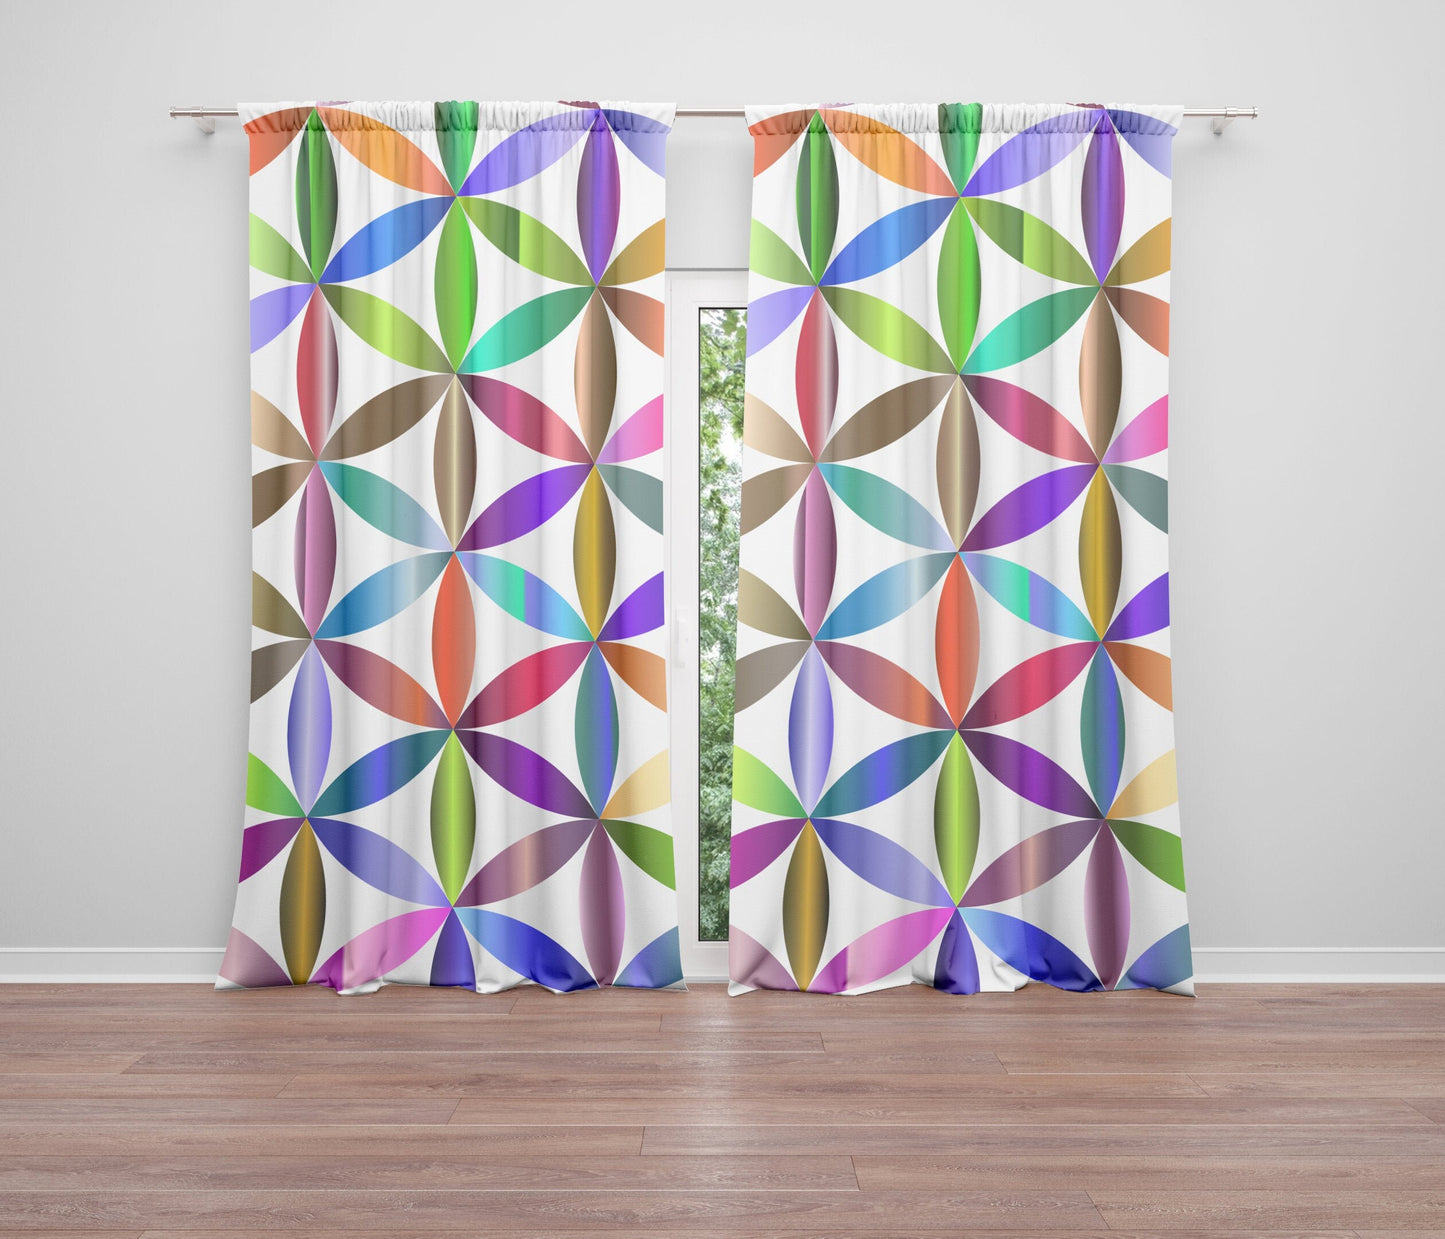 Flower of Life Window Curtain colorful Drapery Curtain Panels colorful window treatment kids window curtains rainbow kids curtains bright